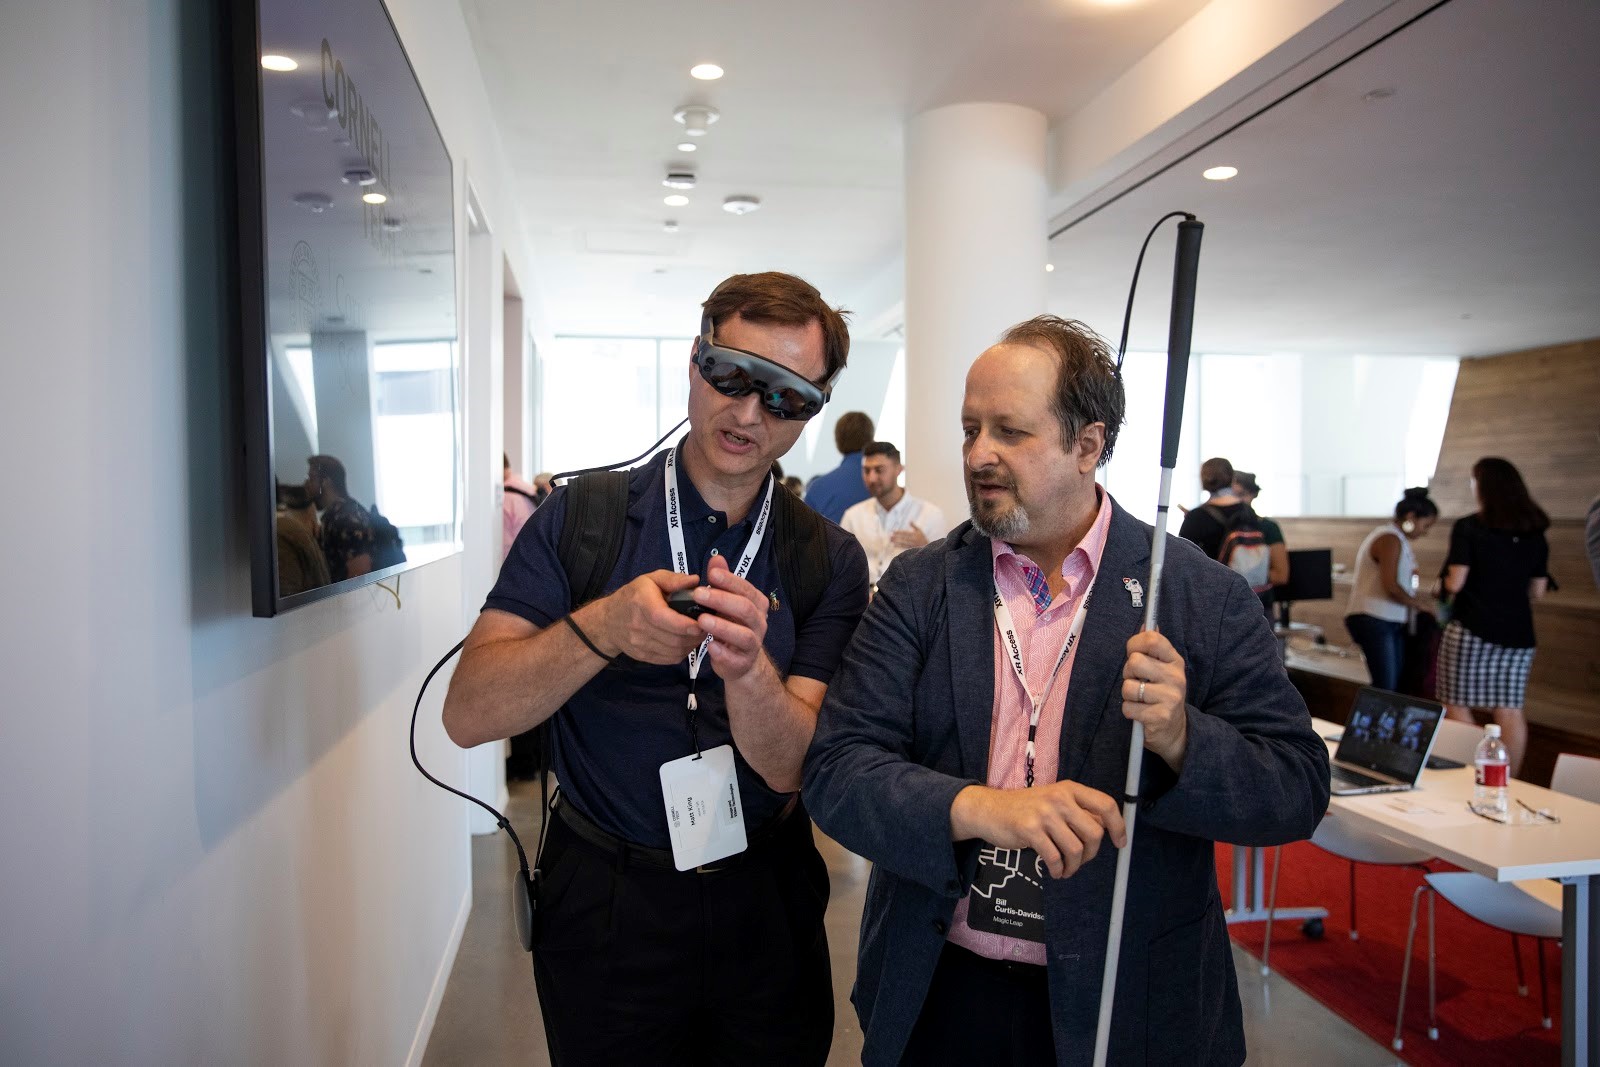 Bill Curtis-Davidson (former Accessibility Leader at Magic Leap) holds a white cane while giving a demo of the Magic Leap 1 spatial computing device to Matt King of Facebook during the 2019 XR Access Symposium in New York, July 2019.